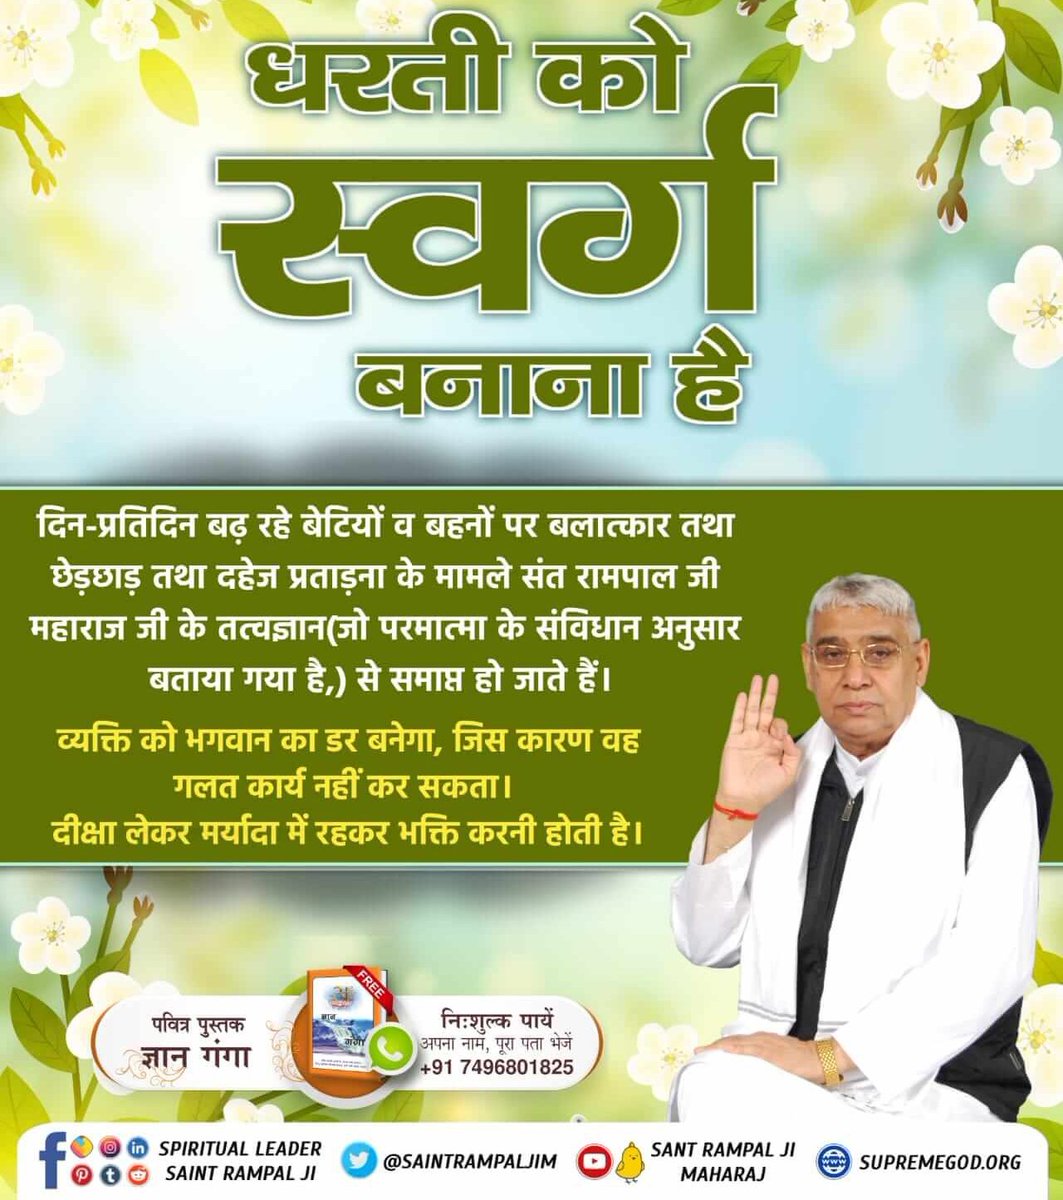 Sant Rampal Ji Maharaj has brought many positive changes in the society through His teachings. His followers are not involved in any illegal activities nor do they indulge in drugs or other intoxicants.
#धरती_को_स्वर्ग_बनाना_है .